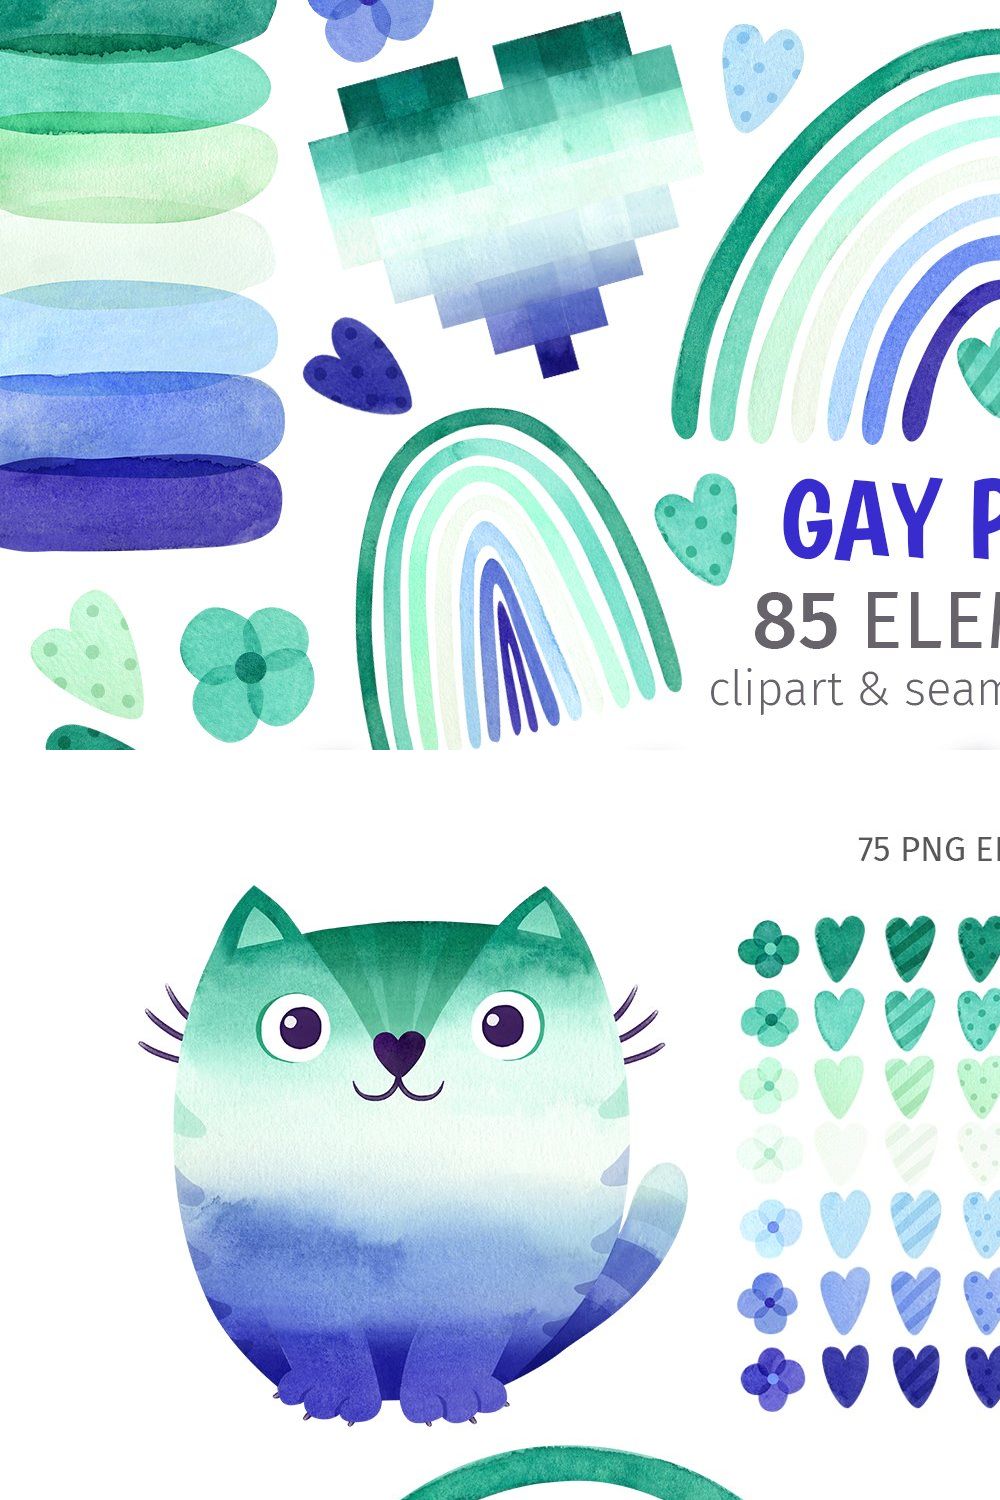 Gay pride clipart and patterns pinterest preview image.